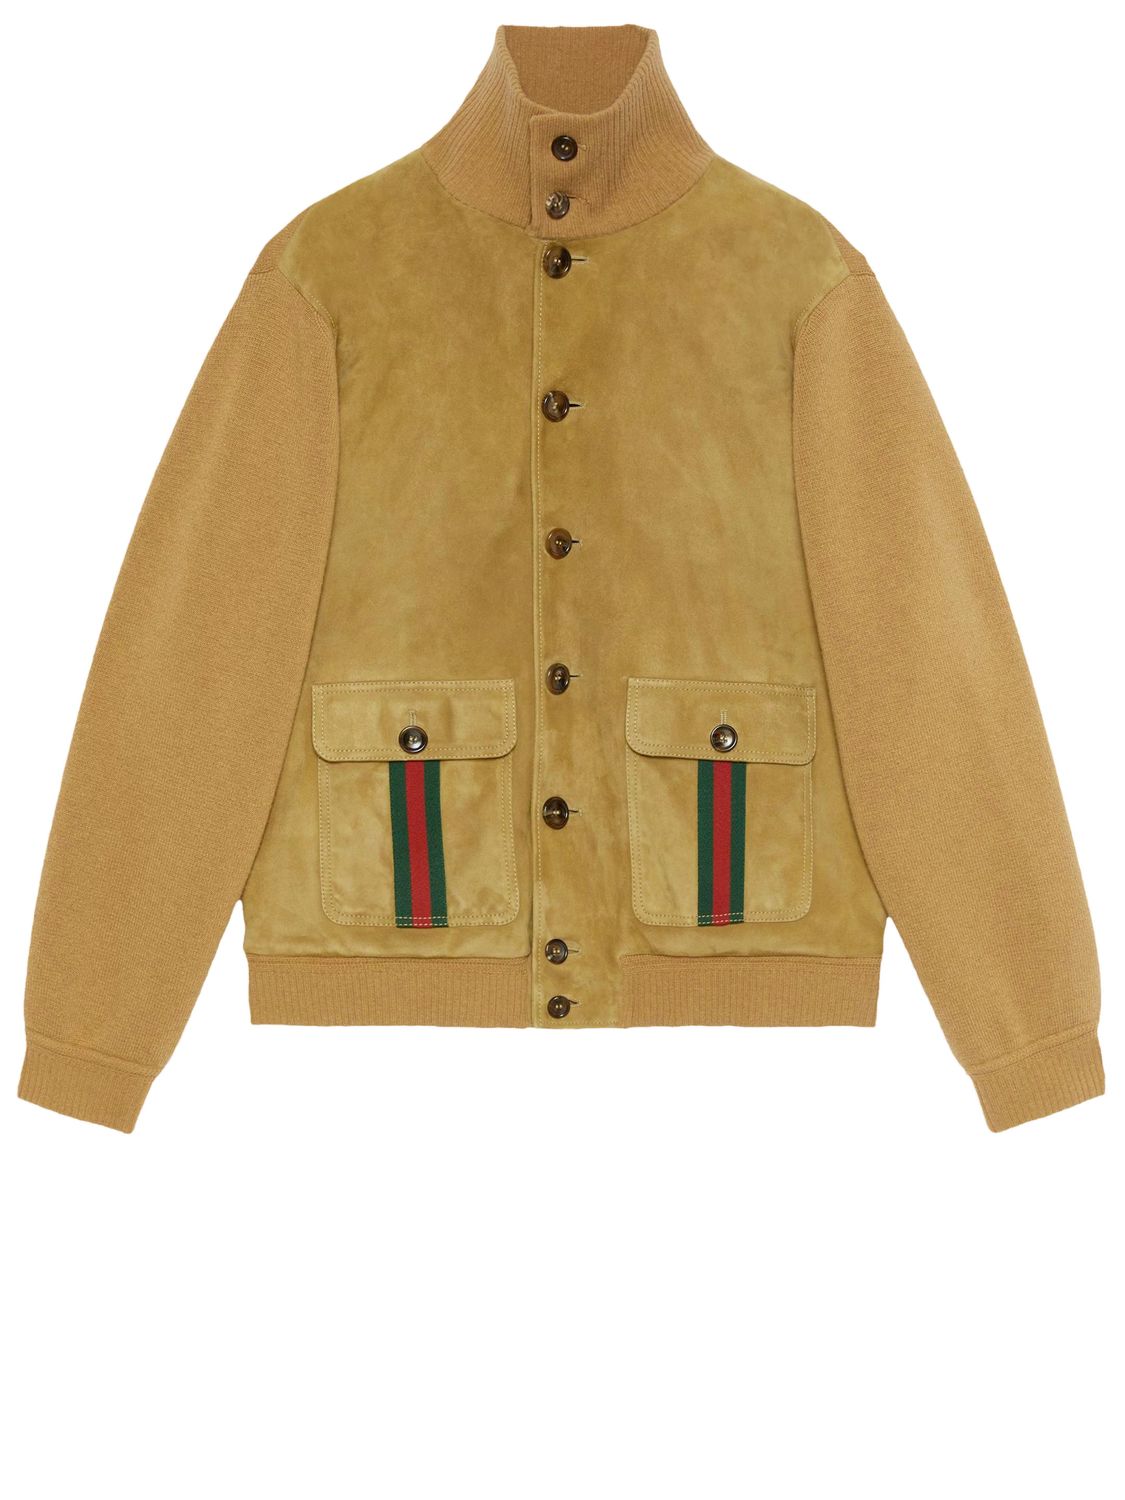 Gucci Men's Suede Bomber Jacket With Wool Details And Green/red Accents In Brown